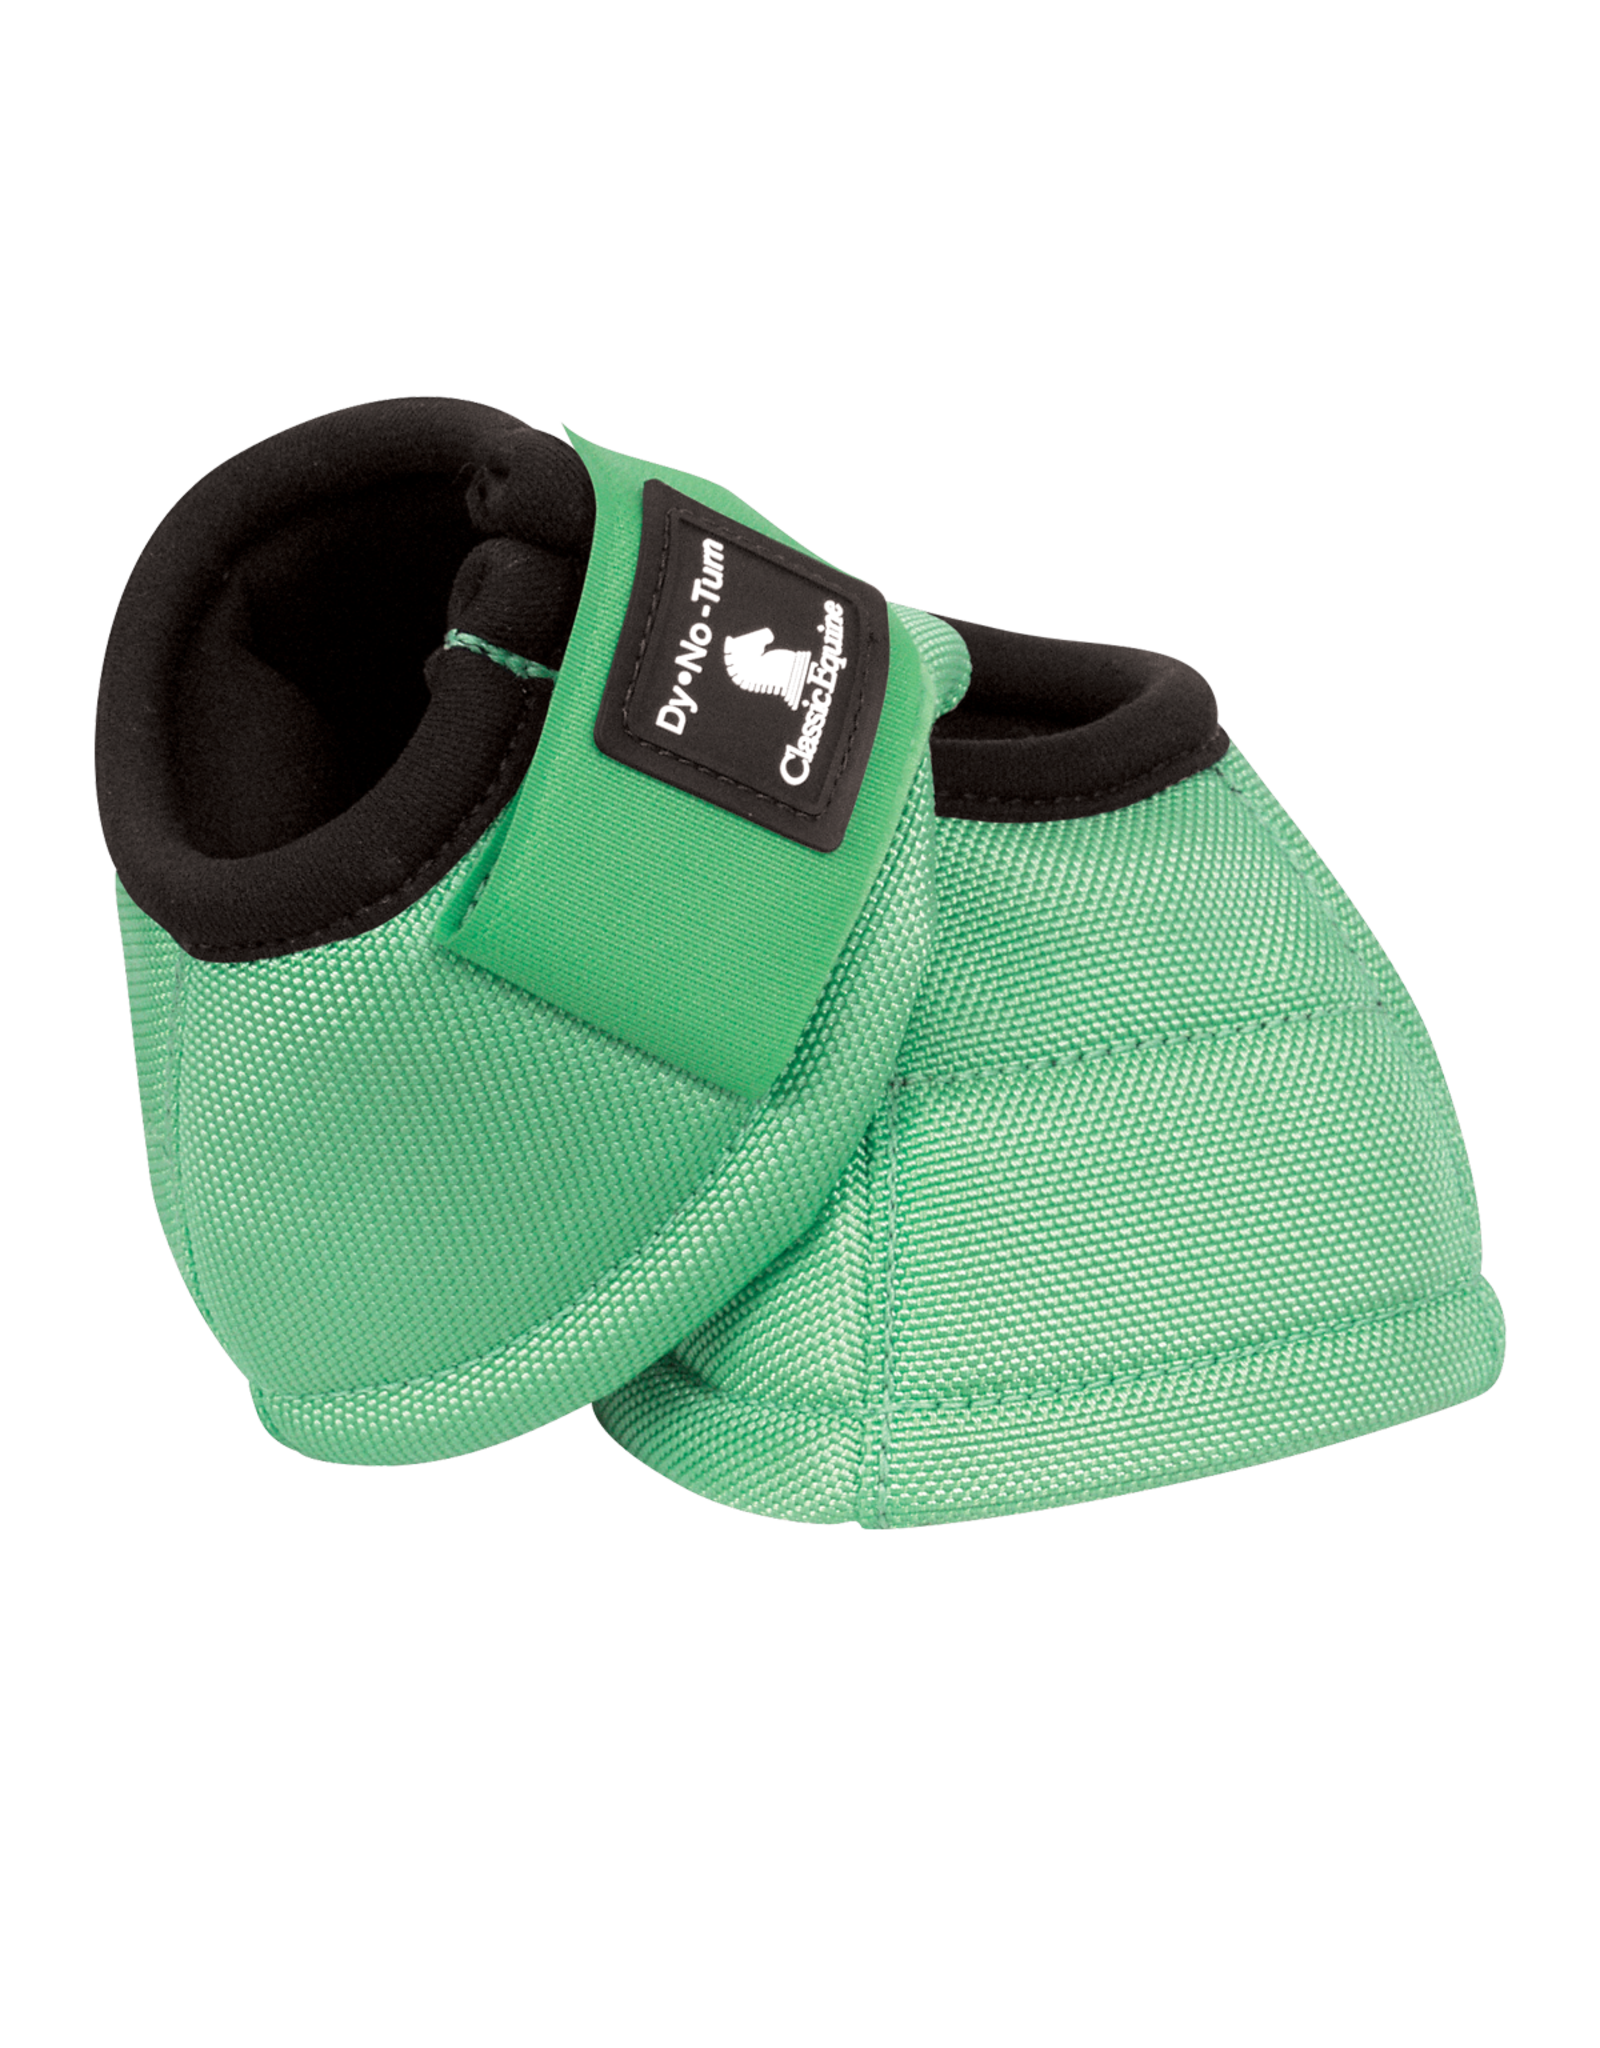 Classic Equine CDN100 No-Turn Bell Boots